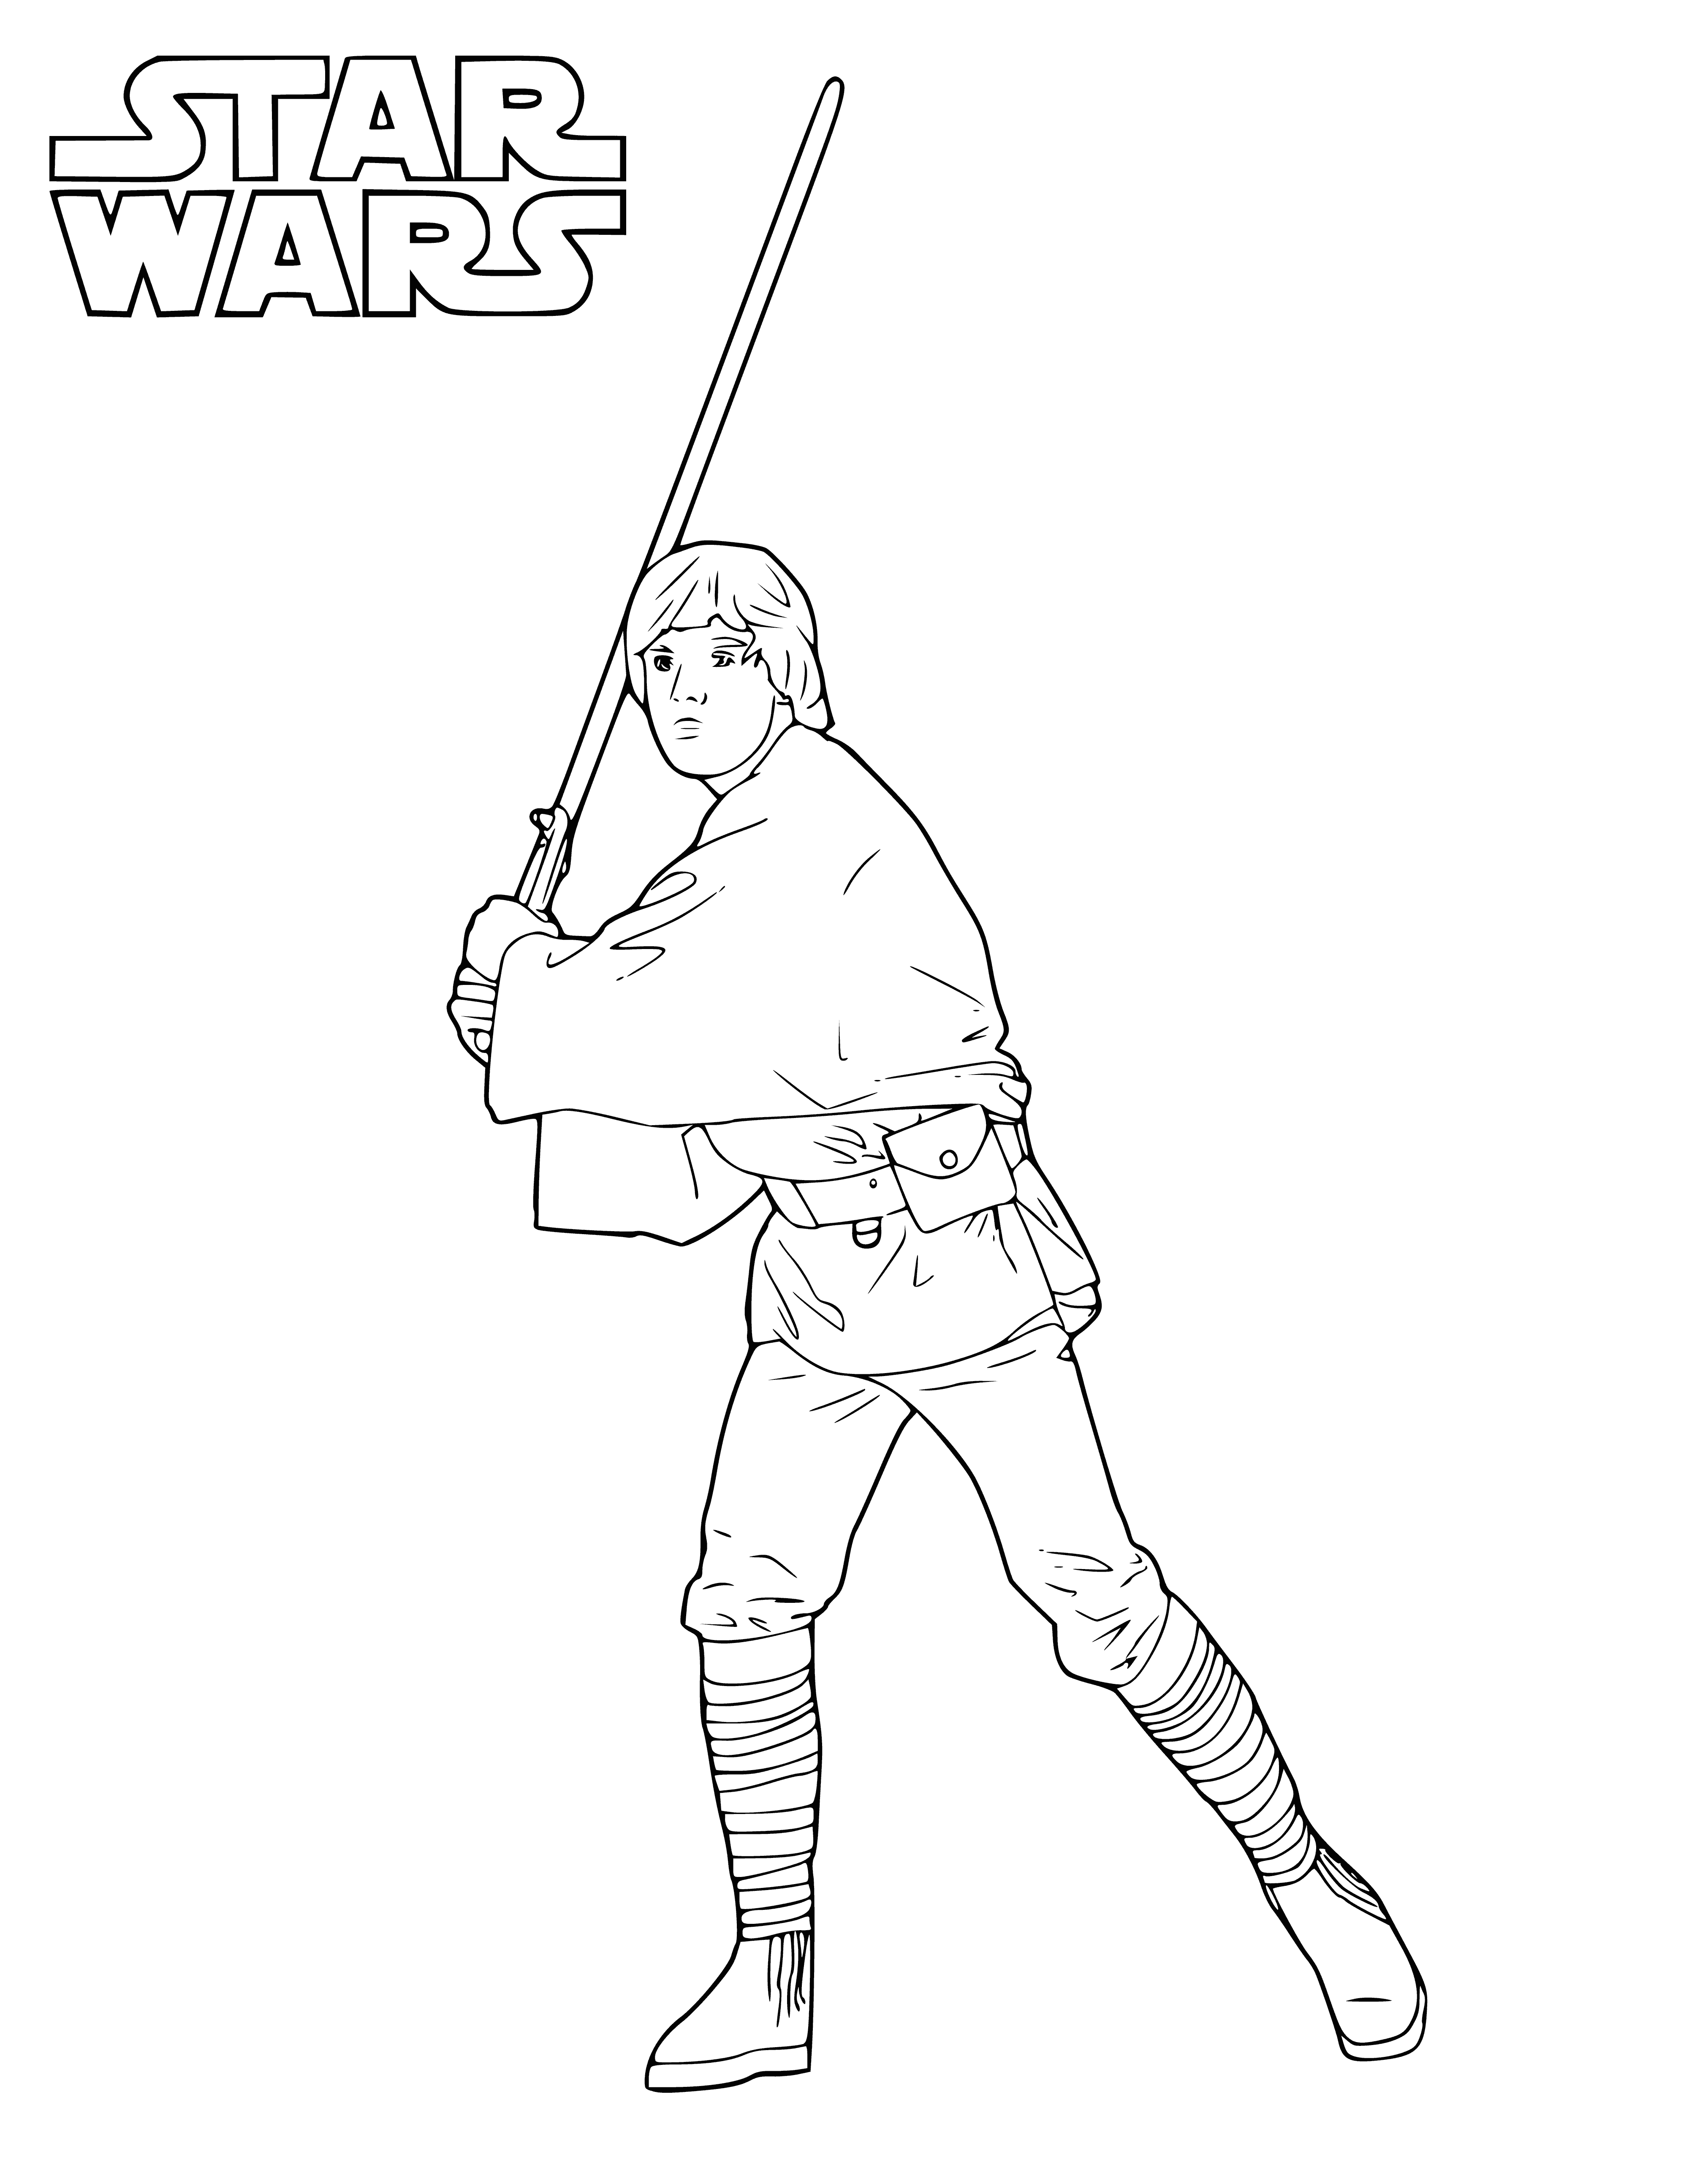 coloring page: Luke Skywalker uses his lightsaber to battle the Empire. Surrounded by stormtroopers, he confronts the enemy undaunted. Ready to defeat them and save the day!